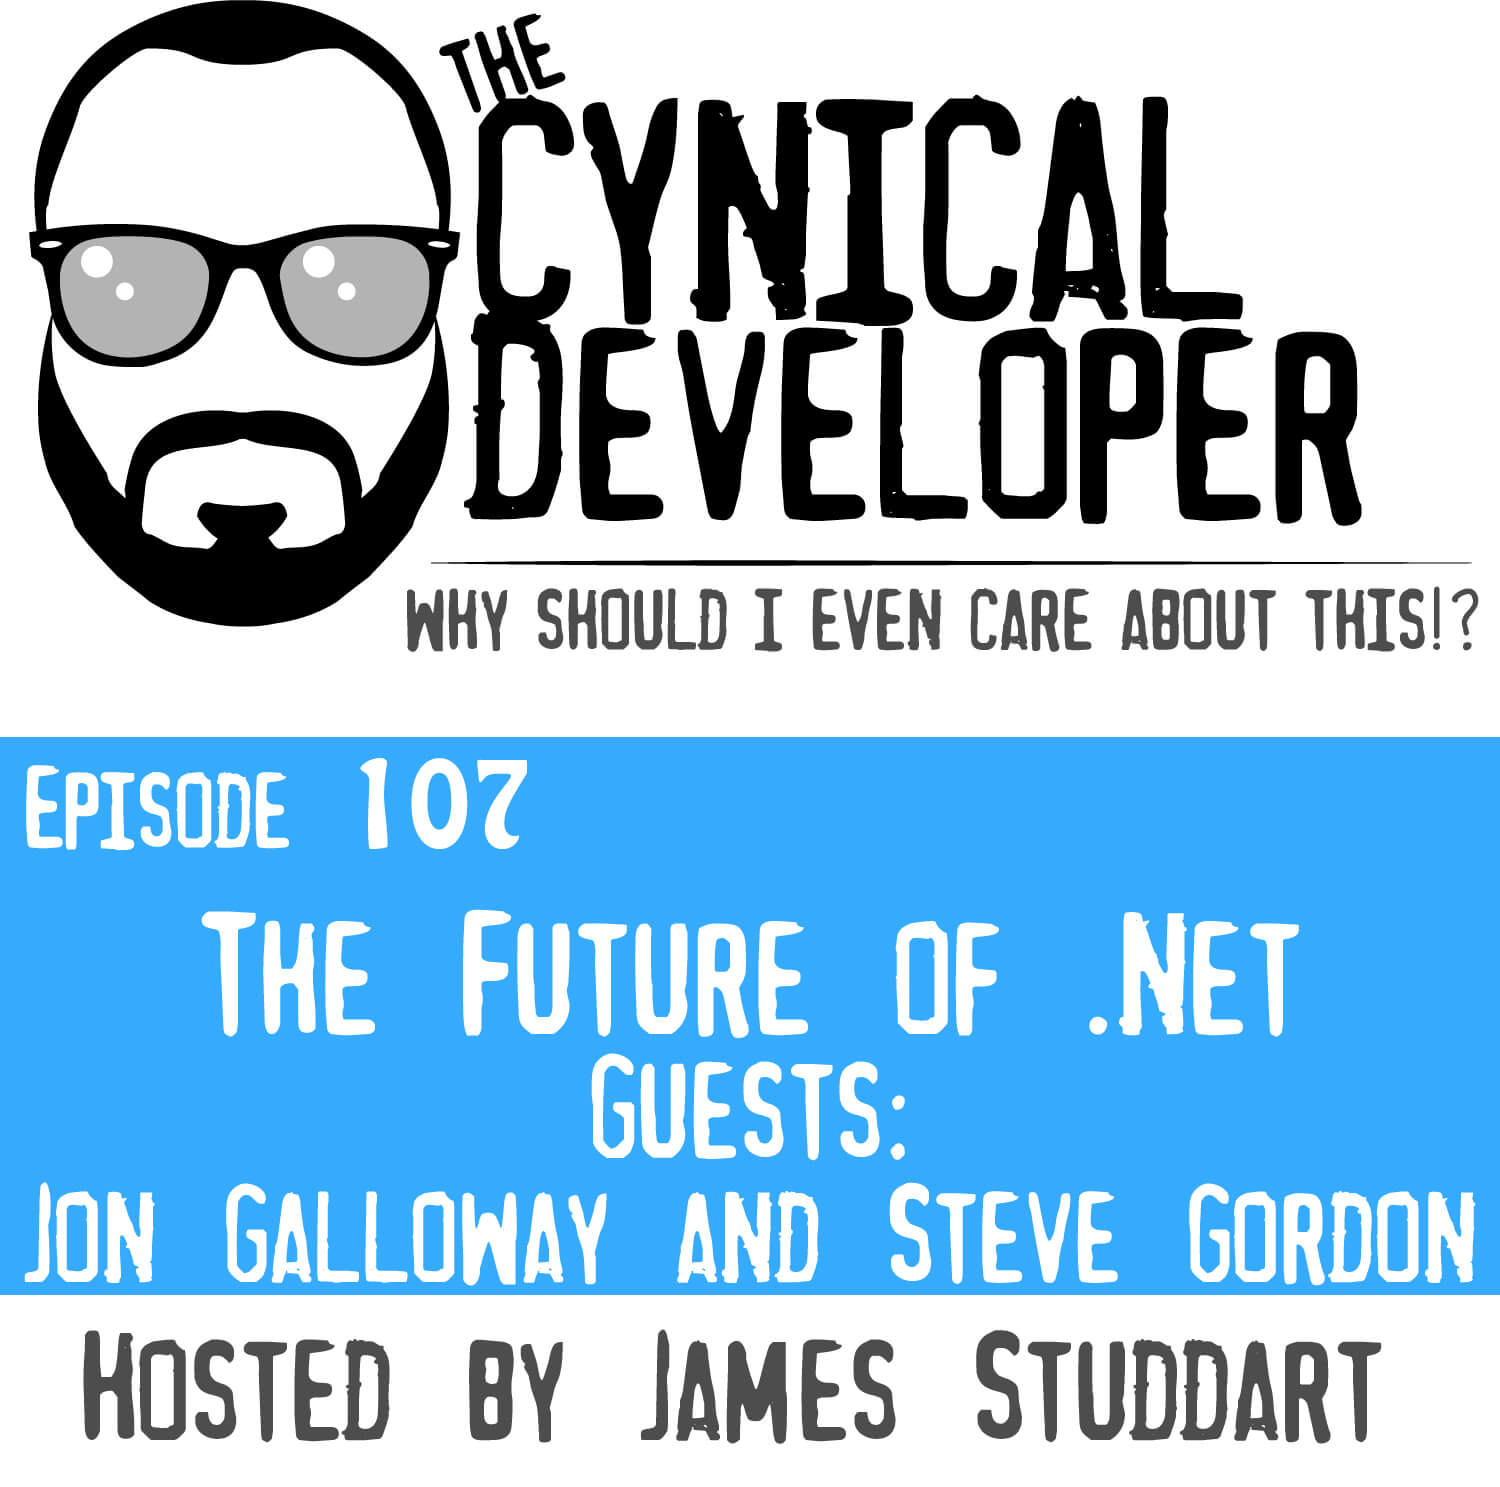 Episode 107 - The Future of .Net